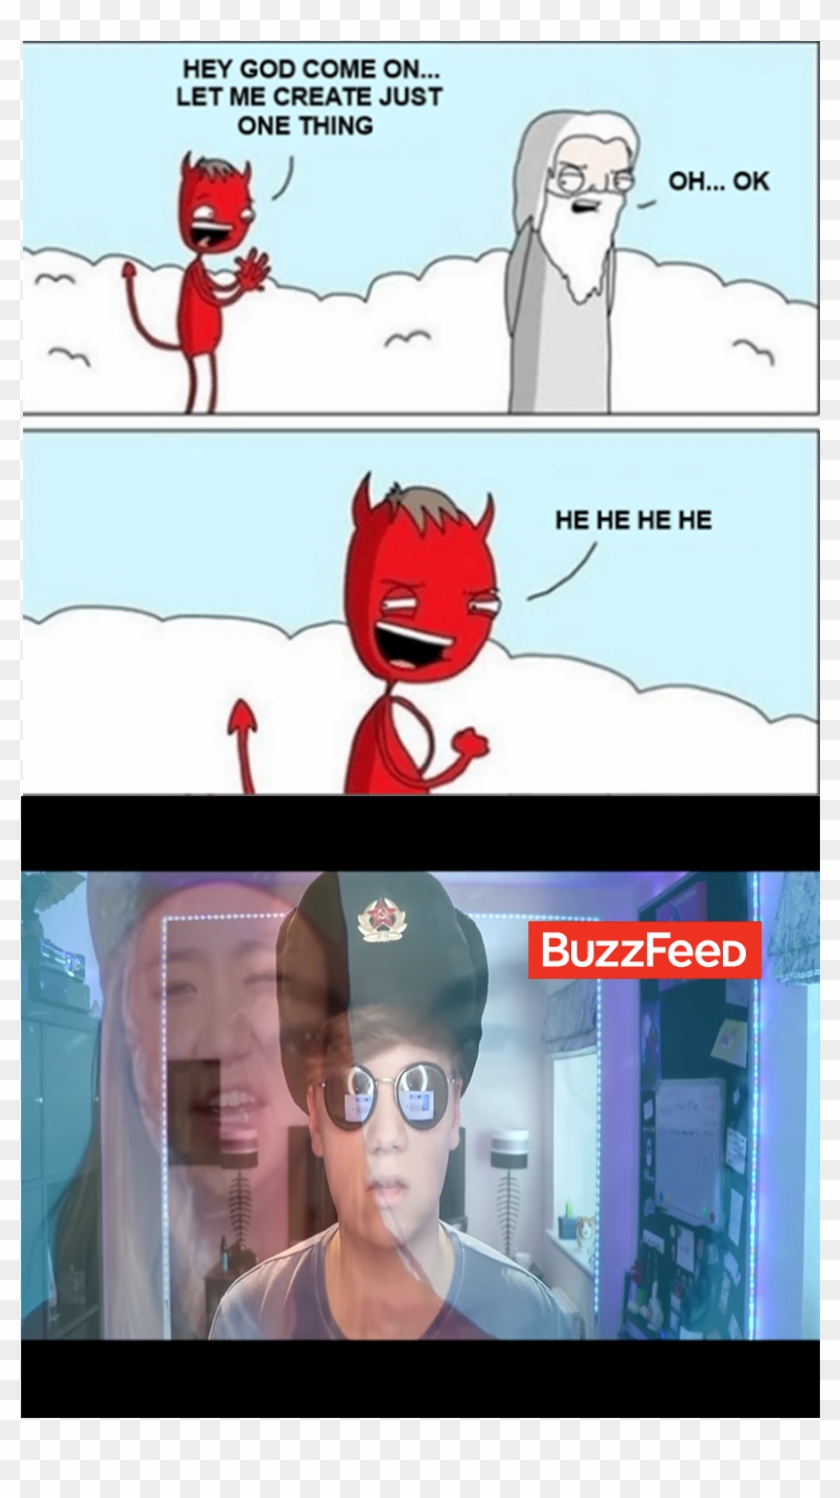 Buzzfeed Exposedfan - Let Me Create One Thing Meme Template Clipart #4868112